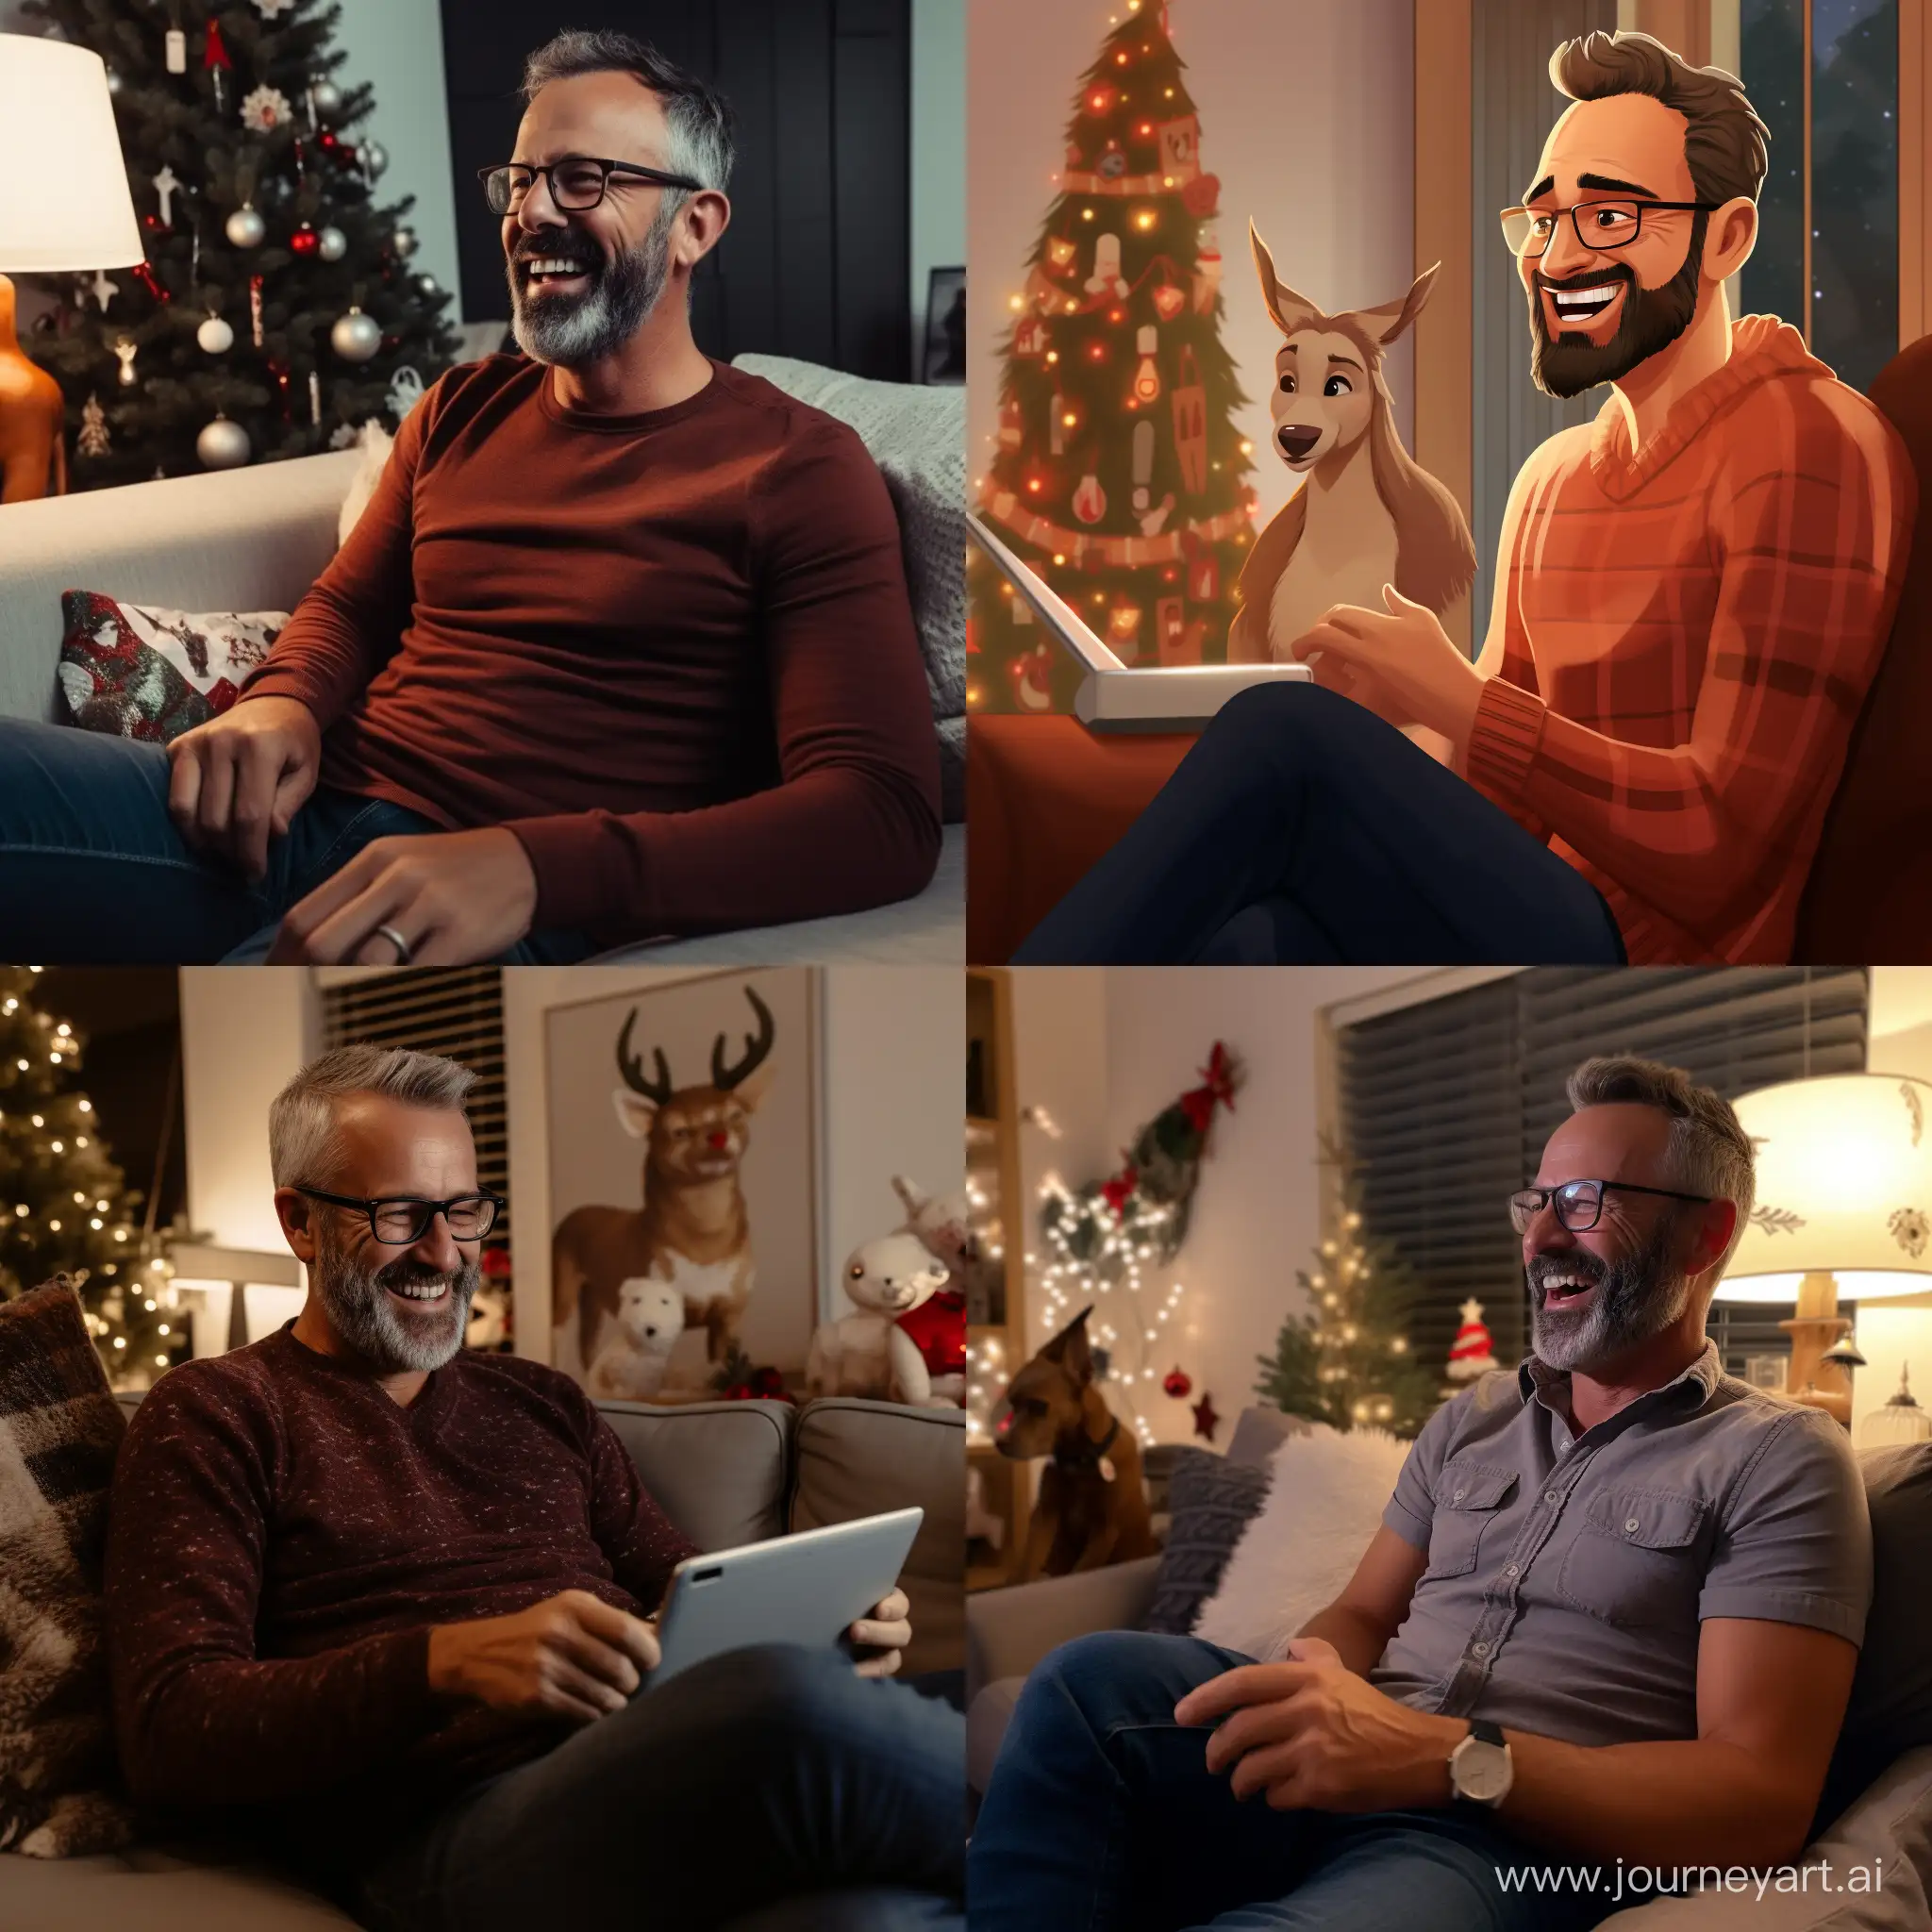 Cozy-Winter-Video-Call-Man-in-Festive-Sweater-Talks-with-Smiling-Wife